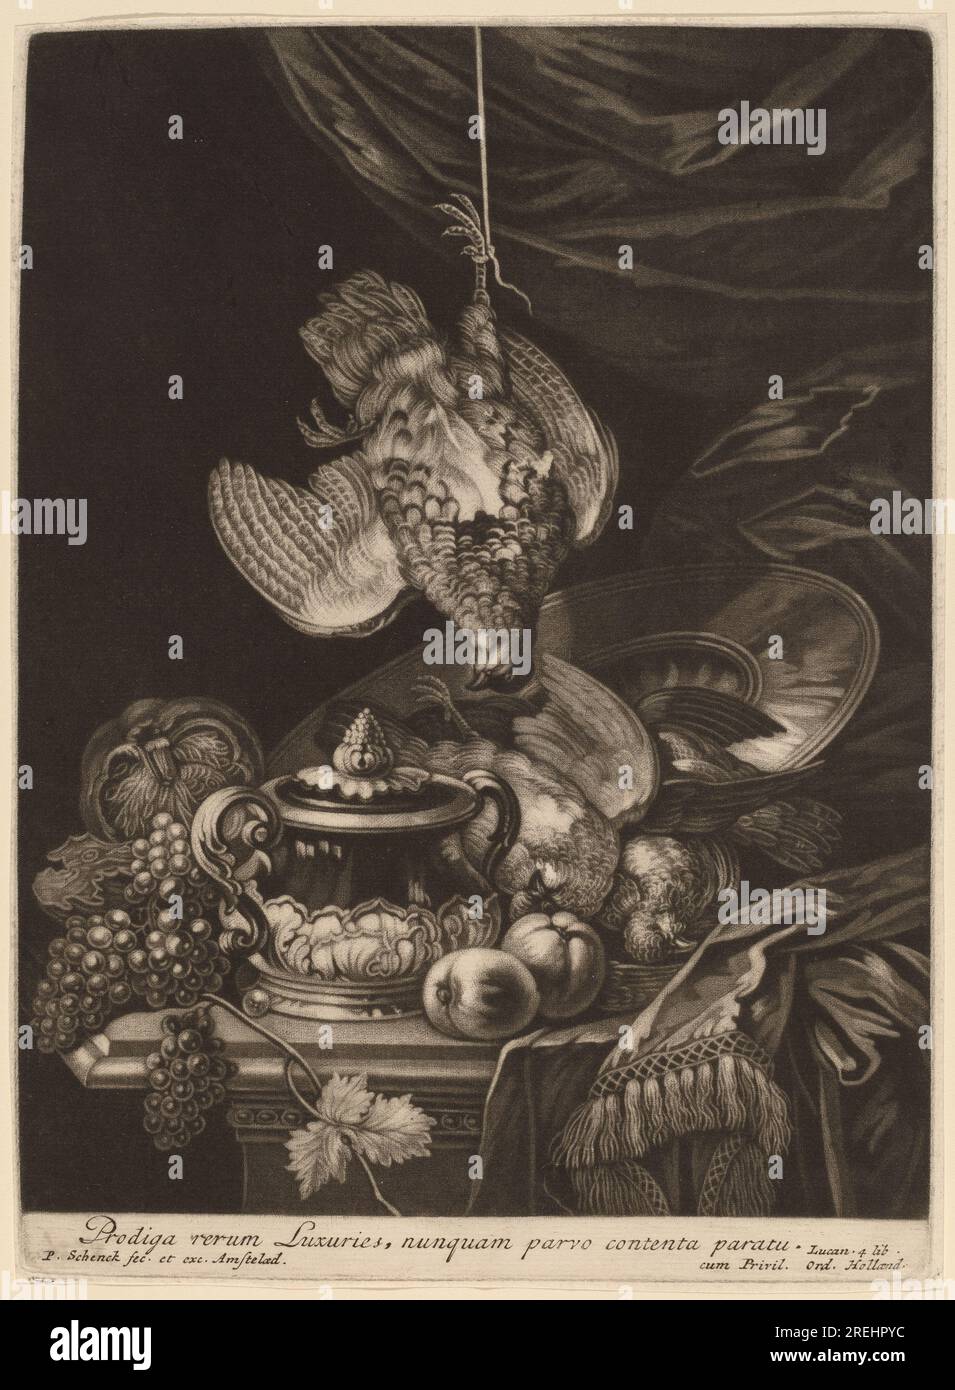 'Pieter Schenck I, Still Life with a Hanging Partridge, mezzotint on laid paper, plate: 24.6 x 18 cm (9 11/16 x 7 1/16 in.) sheet: 24.9 x 18.4 cm (9 13/16 x 7 1/4 in.), Katharine Shepard Fund, 2000.78.2' Stock Photo